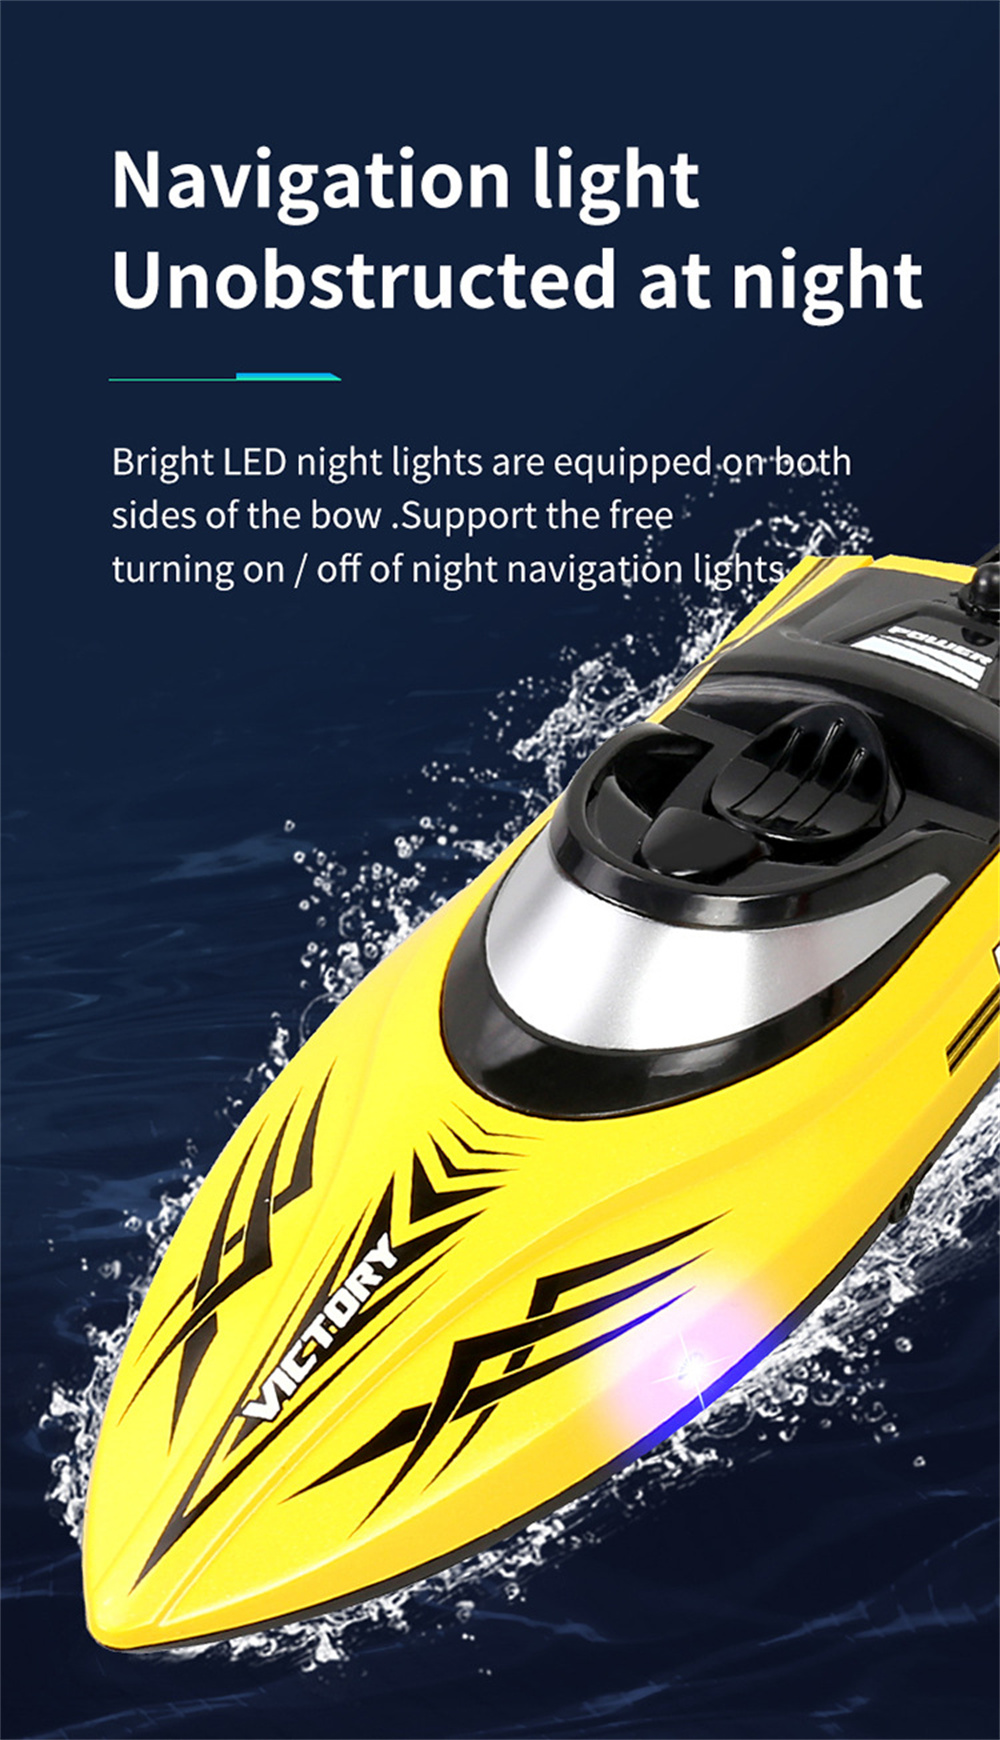 HXJRC HJ811 2.4G 4CH RC Boat High Speed LED Light Speedboat Waterproof 20km/h Electric Racing Vehicles Models Lakes Pools Remote Control Toys